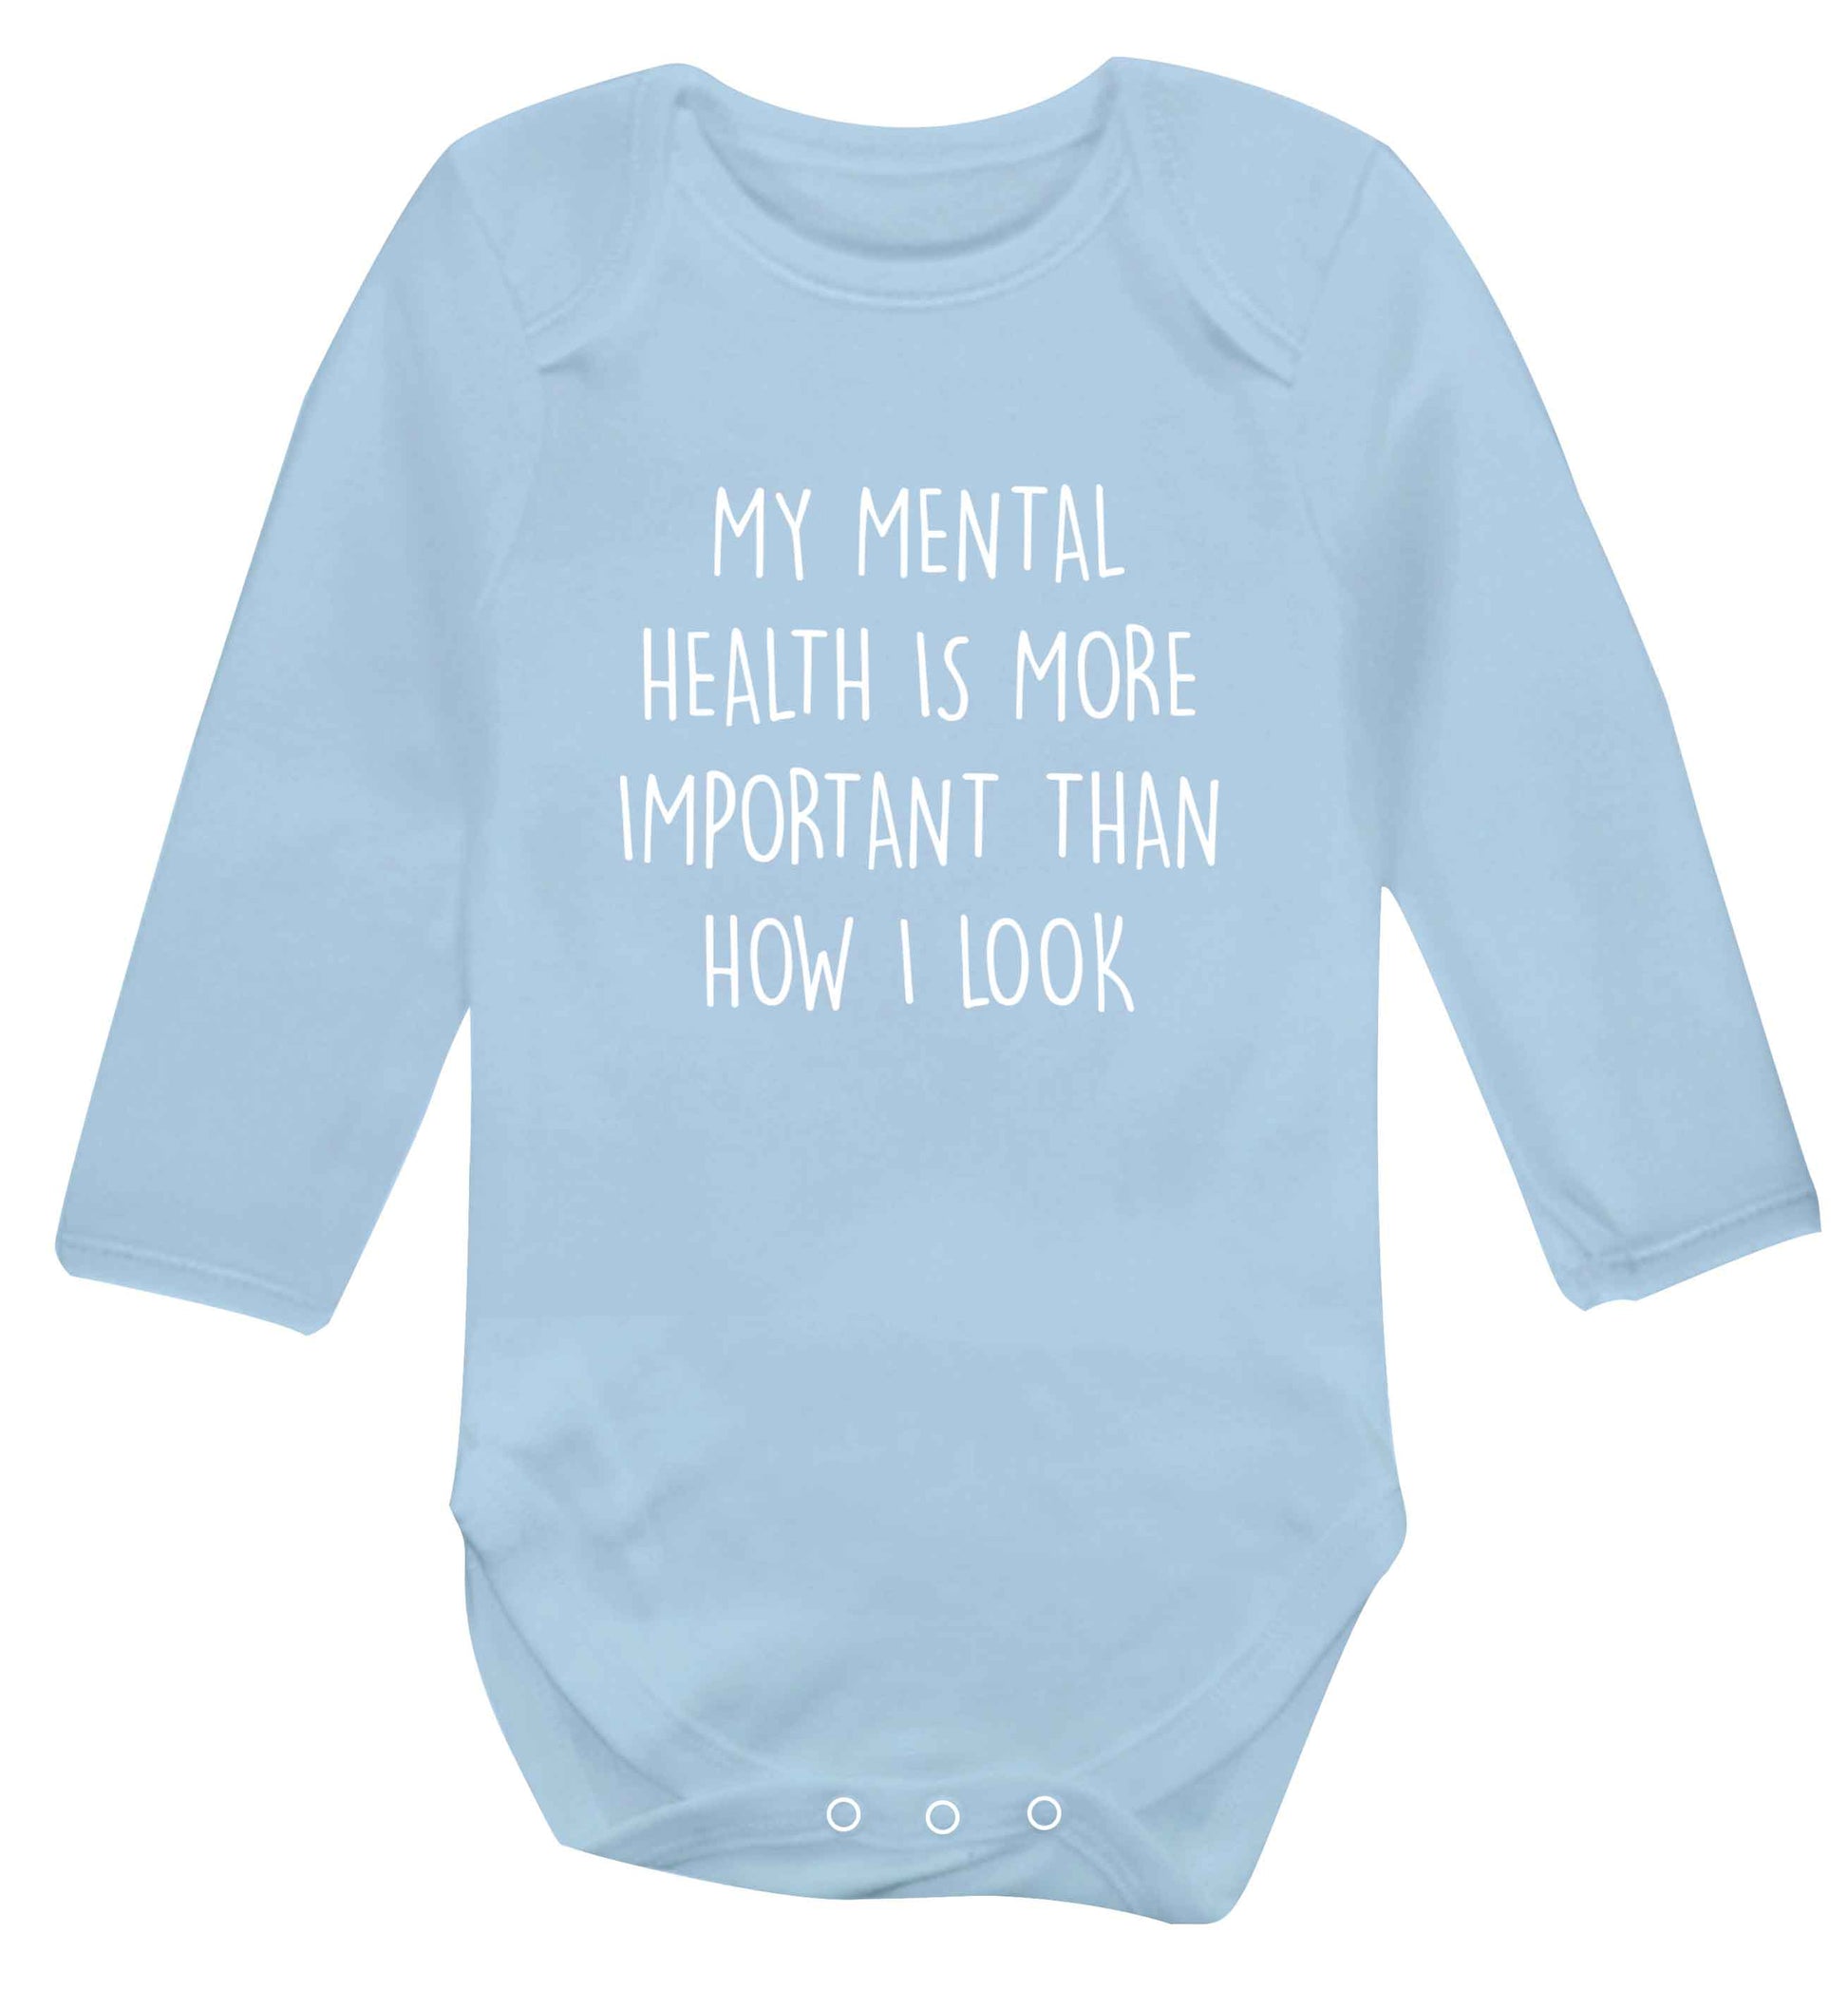 My mental health is more importnat than how I look baby vest long sleeved pale blue 6-12 months